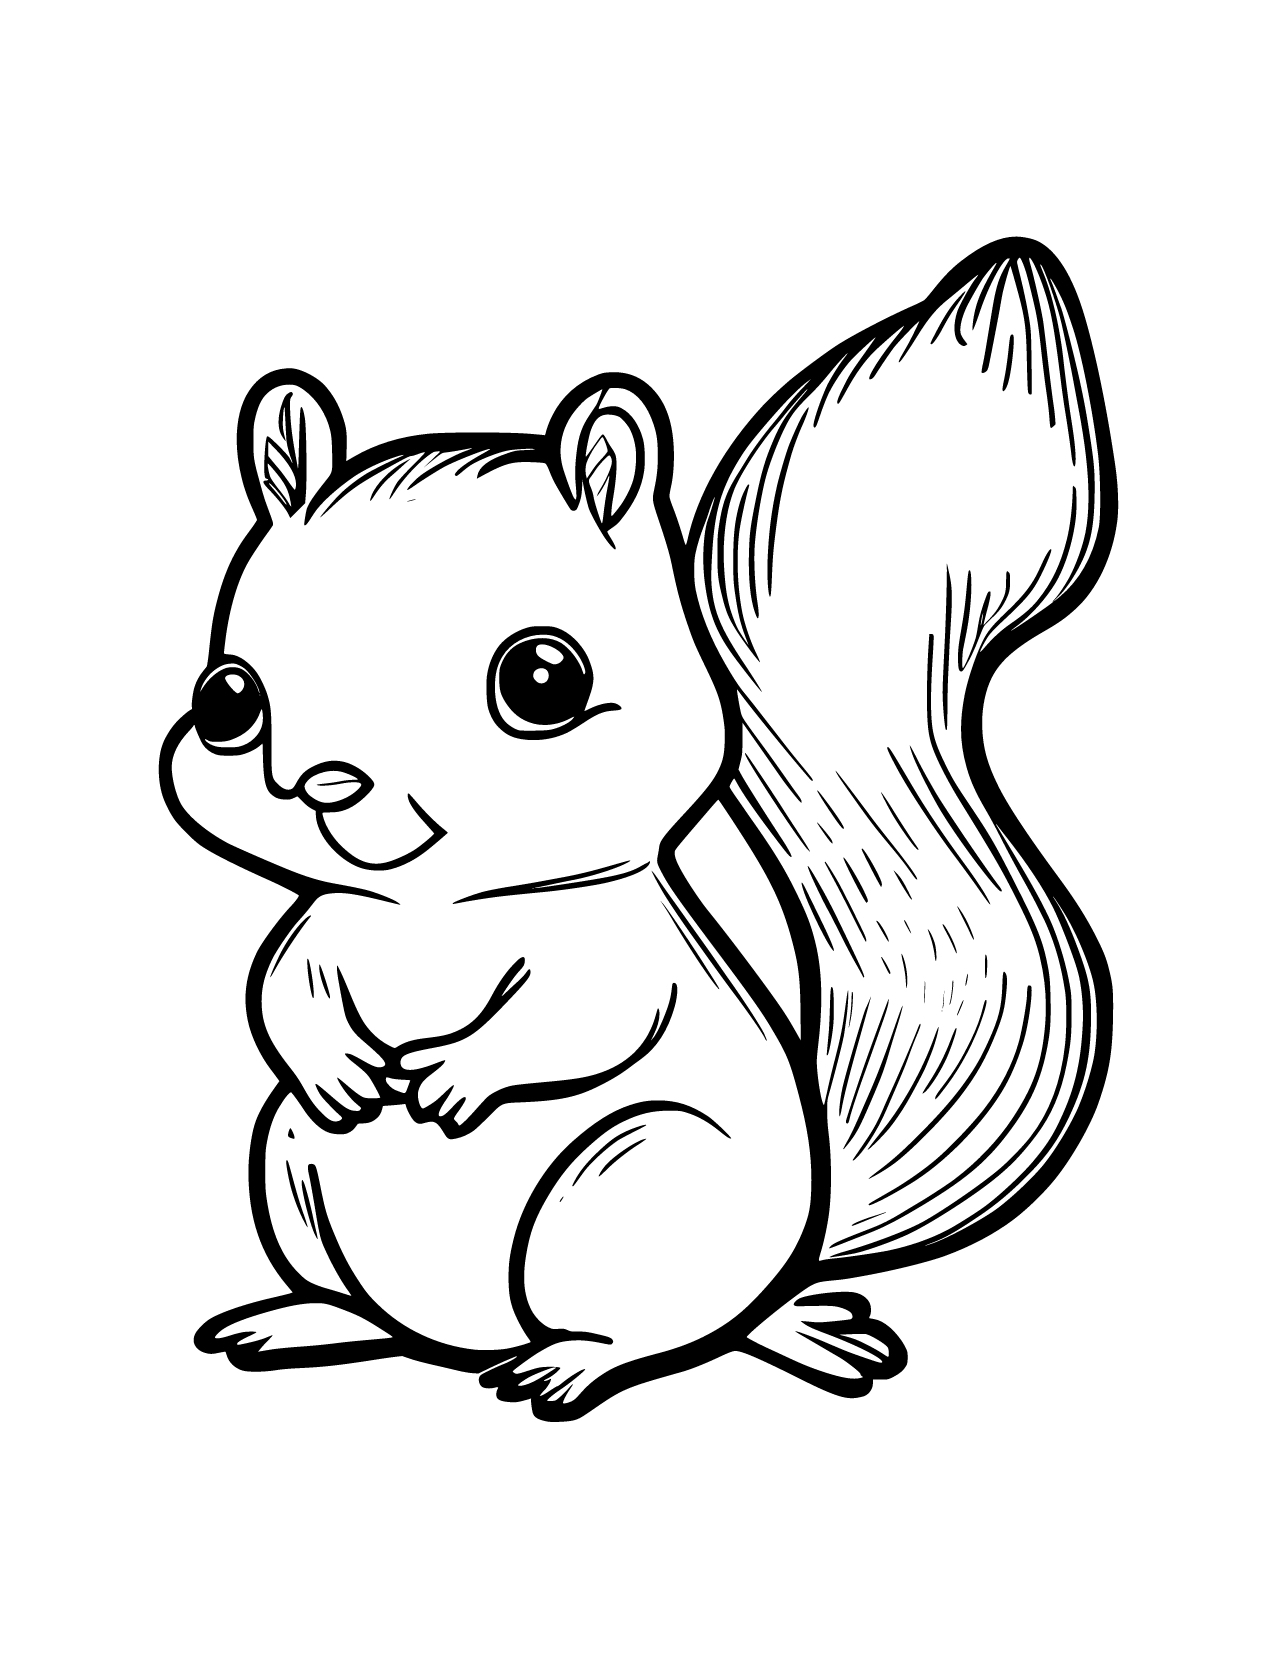 Adorable squirrel coloring pages for kids and adults